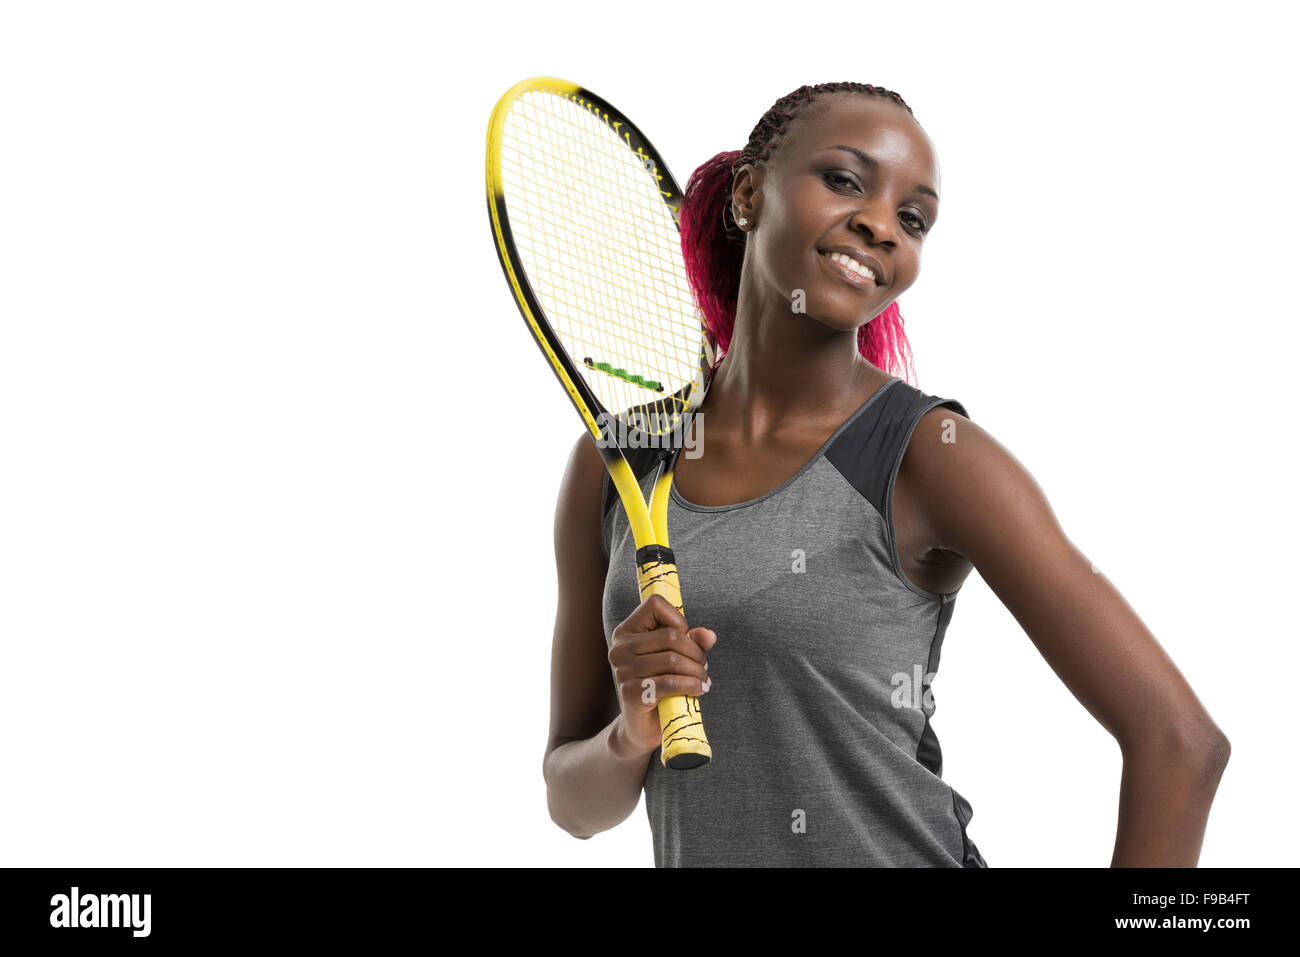 Half length portrait of young woman playing tennis on a dross field. Healthy lifestyle. Isolated white background Stock Photo